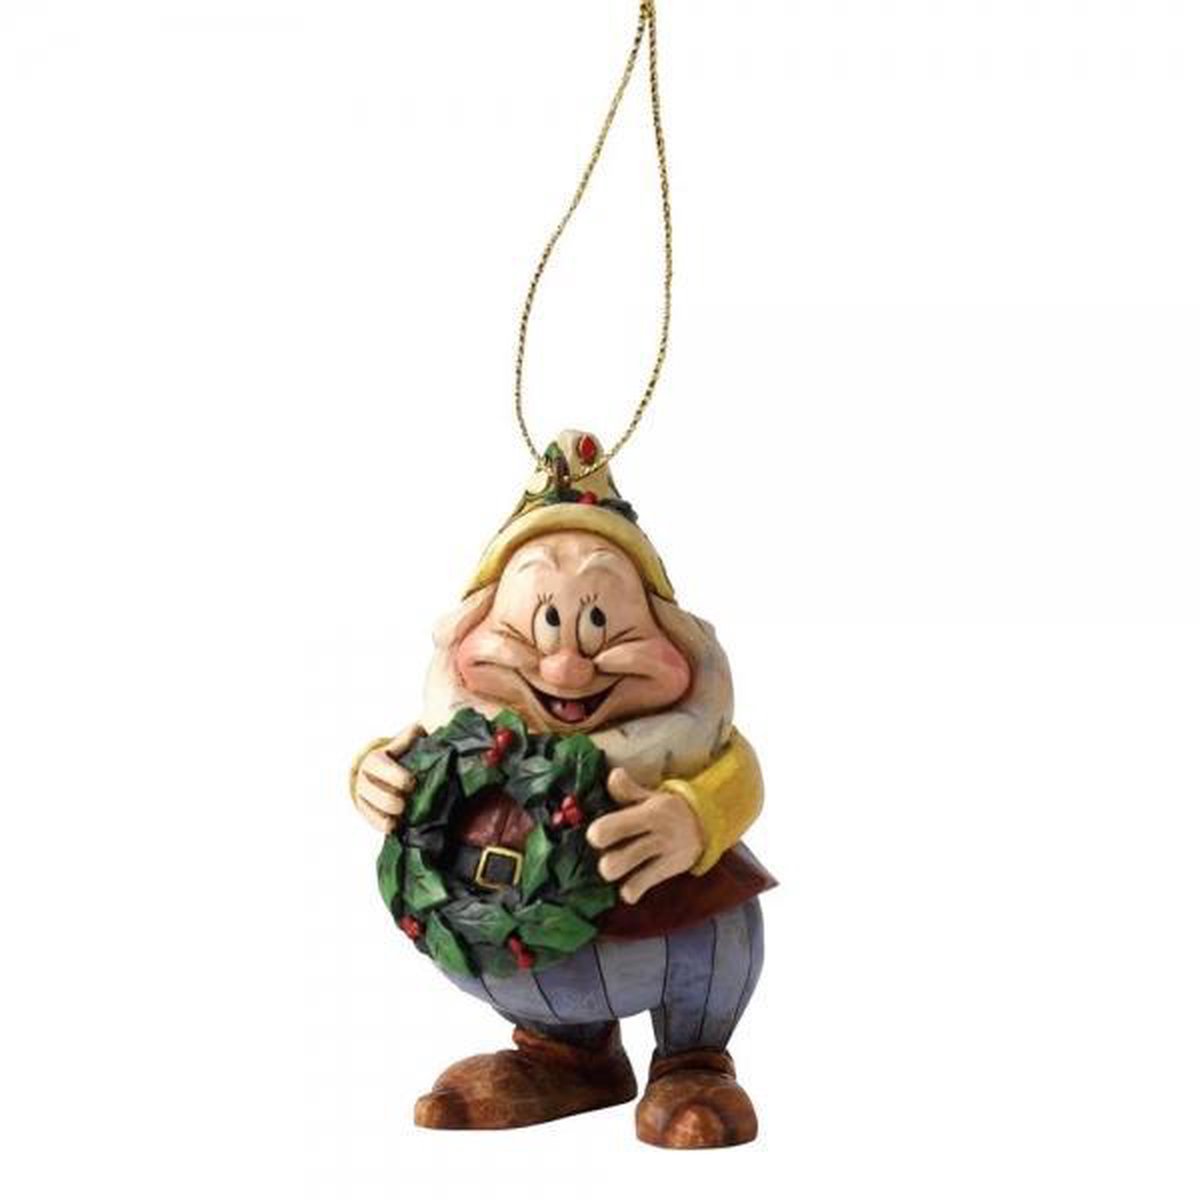 Disney Traditions Ornament Kersthanger Happy 7 cm